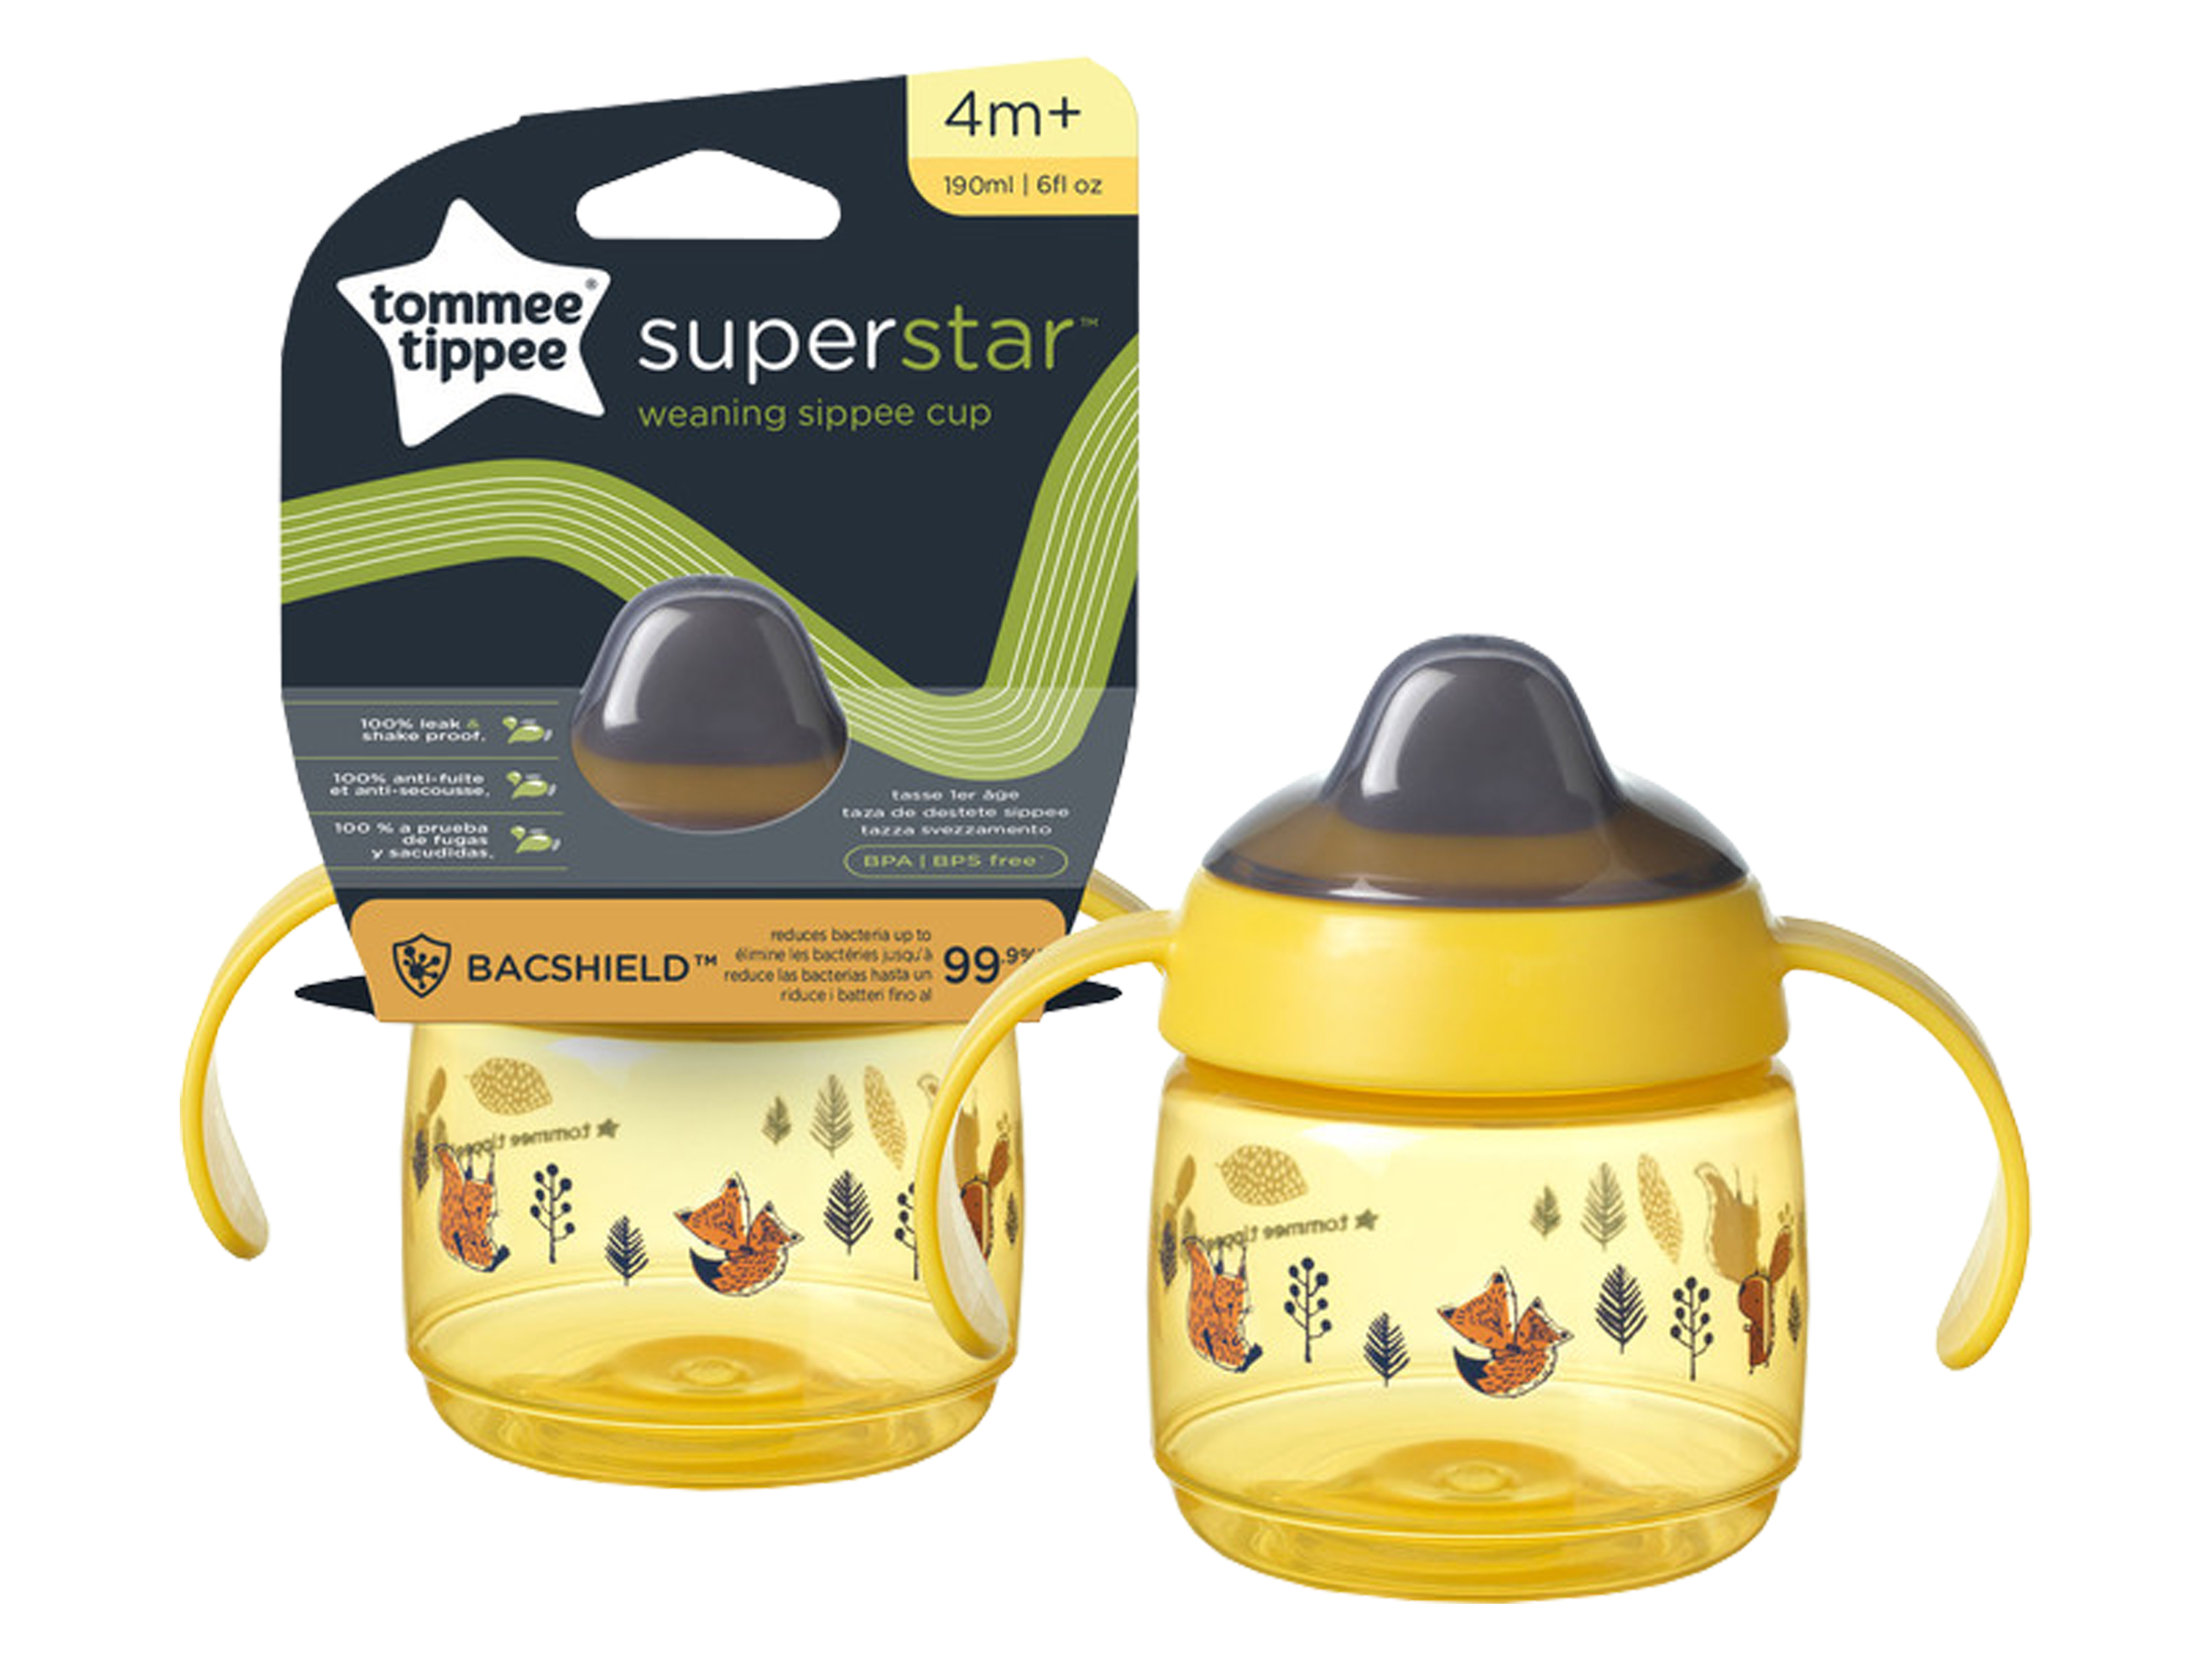 Tommee Tippee Superstar Sippee Cup 4md+, gul, 1 stk.